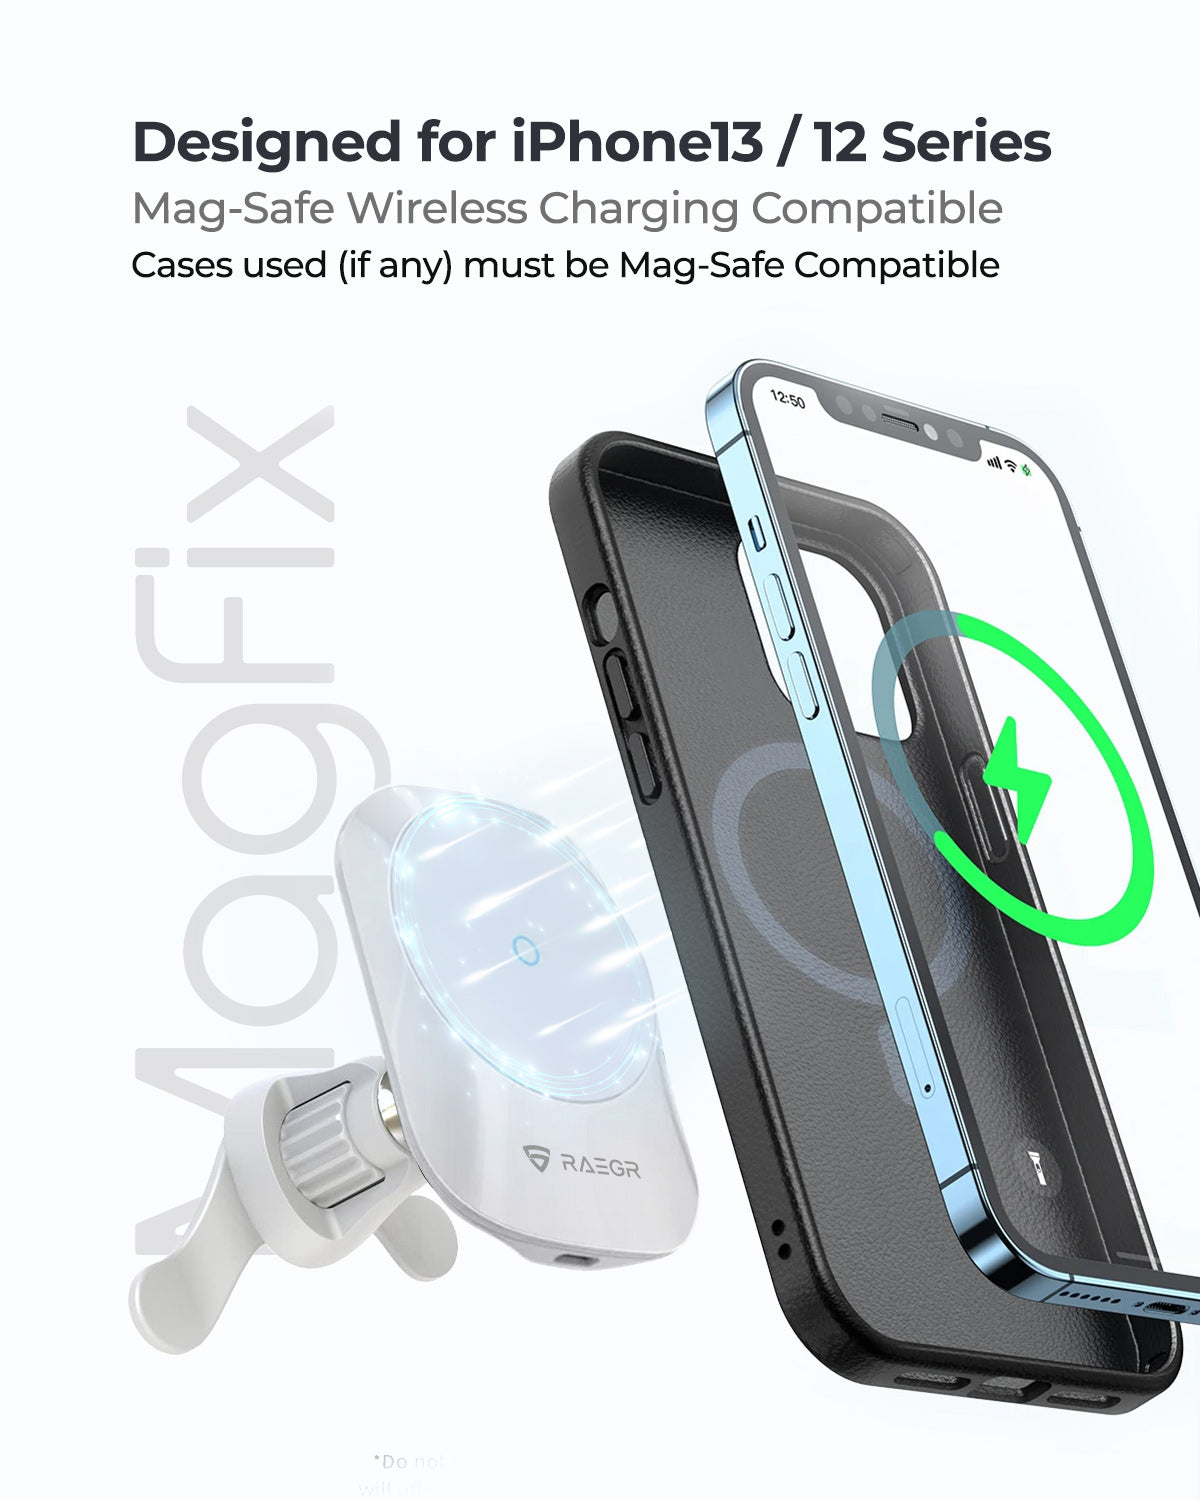 RAEGR MagFix Arc M1450C 15W Car Magnetic Wireless Charger with Air Vent with Lock & Foldable Stand Magnet Holder Compatible for iPhone 12 & 13 Series